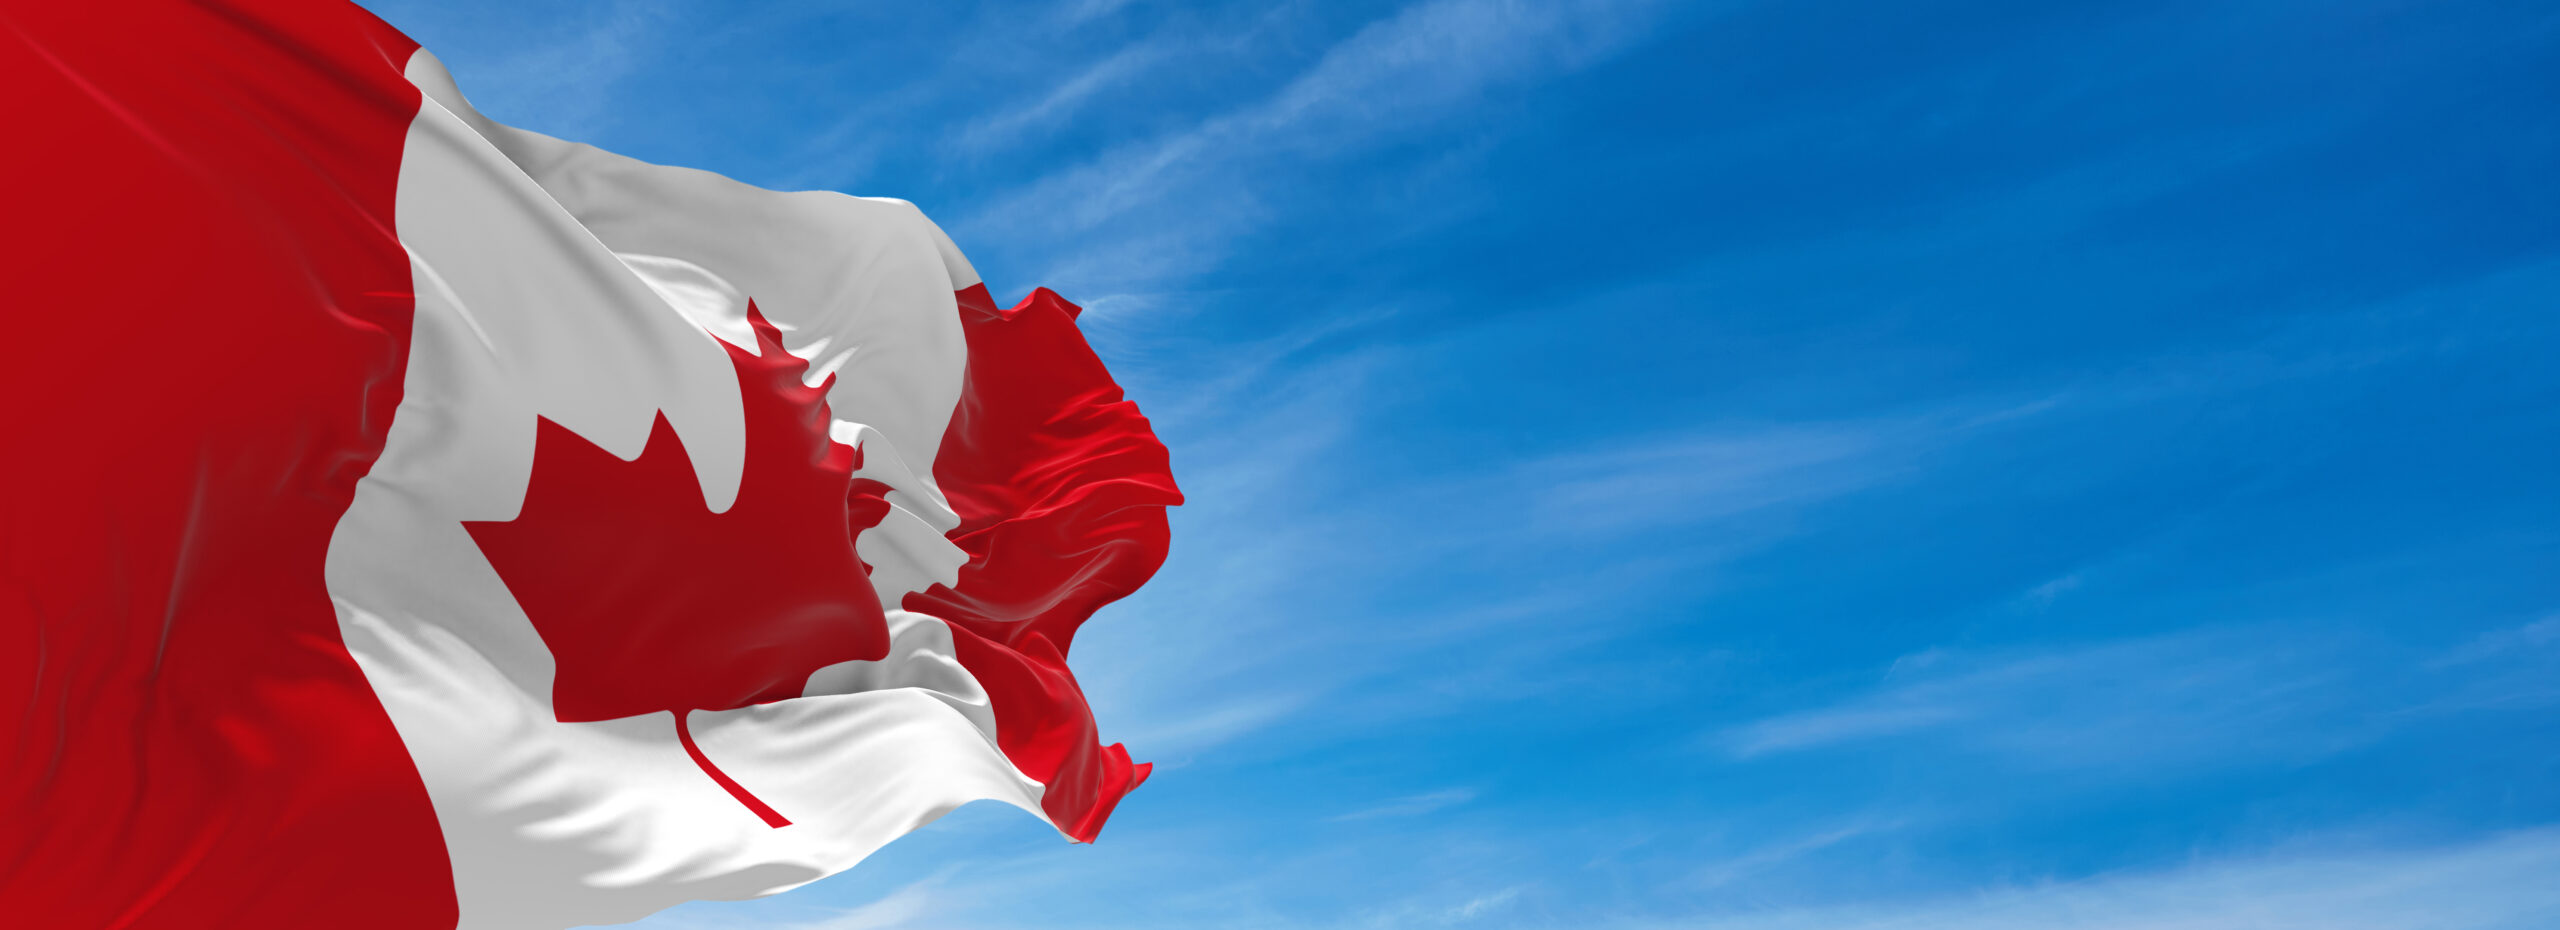 Large,Flag,Of,Canada,Waving,In,The,Wind,Against,The